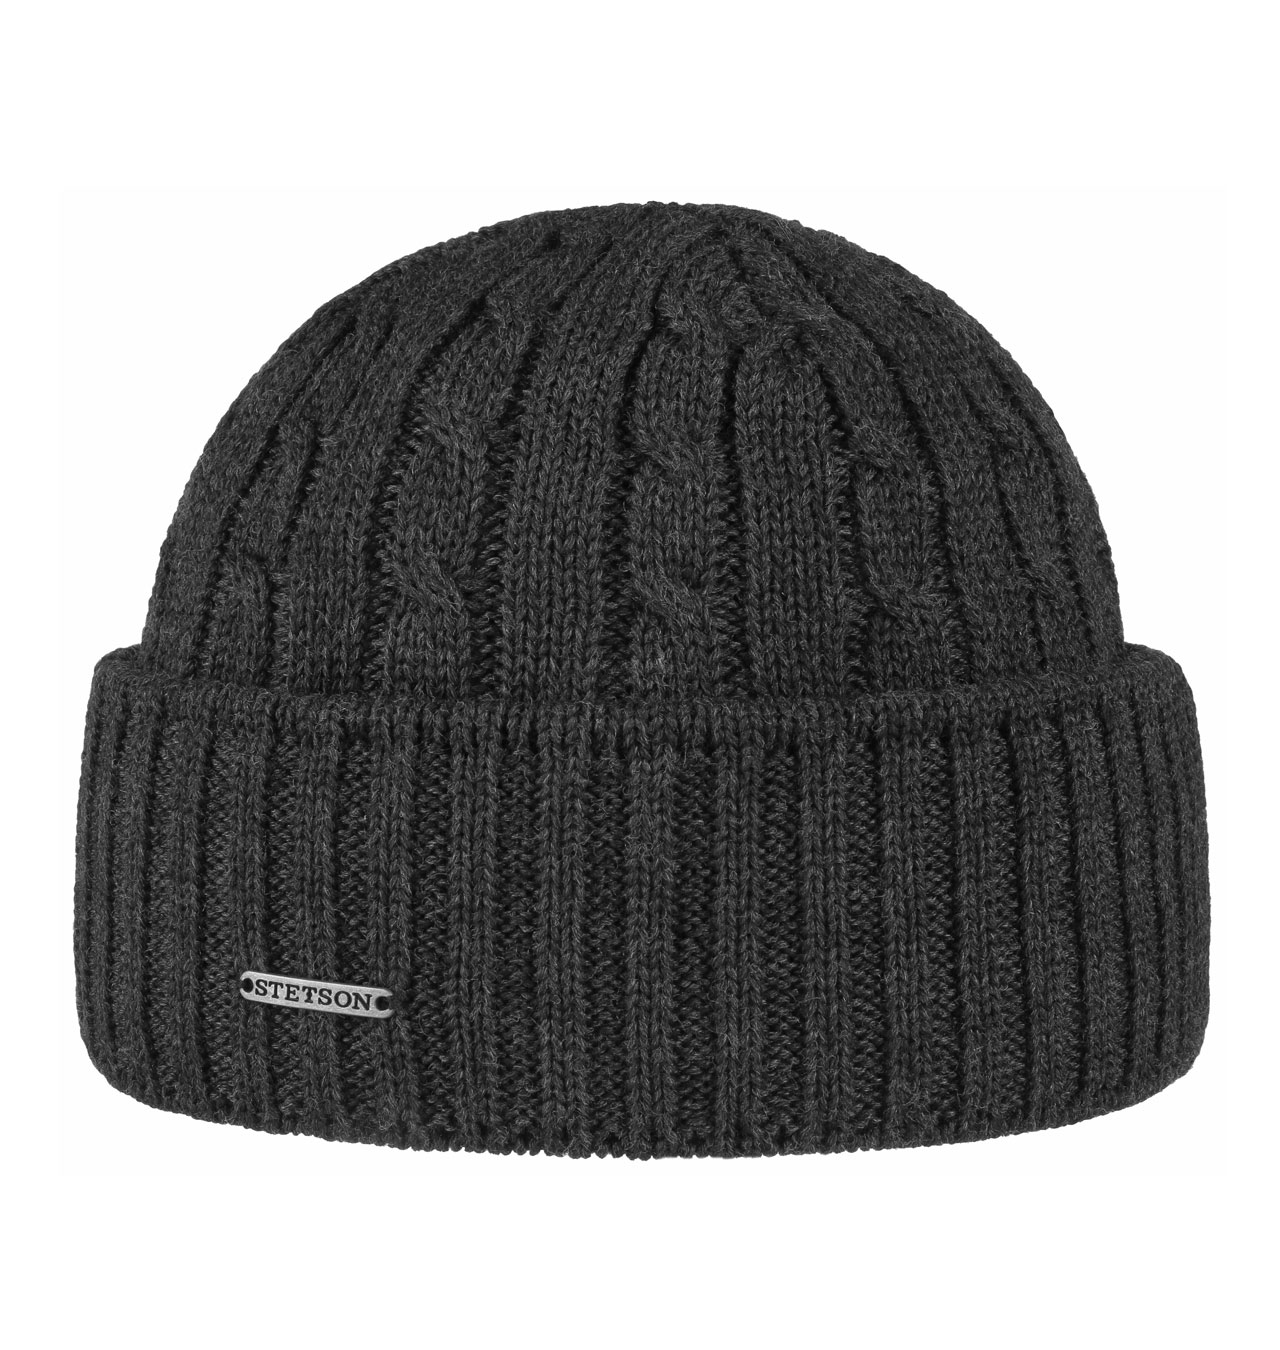 Stetson - Georgia Wool Knit Hat - Anthracite